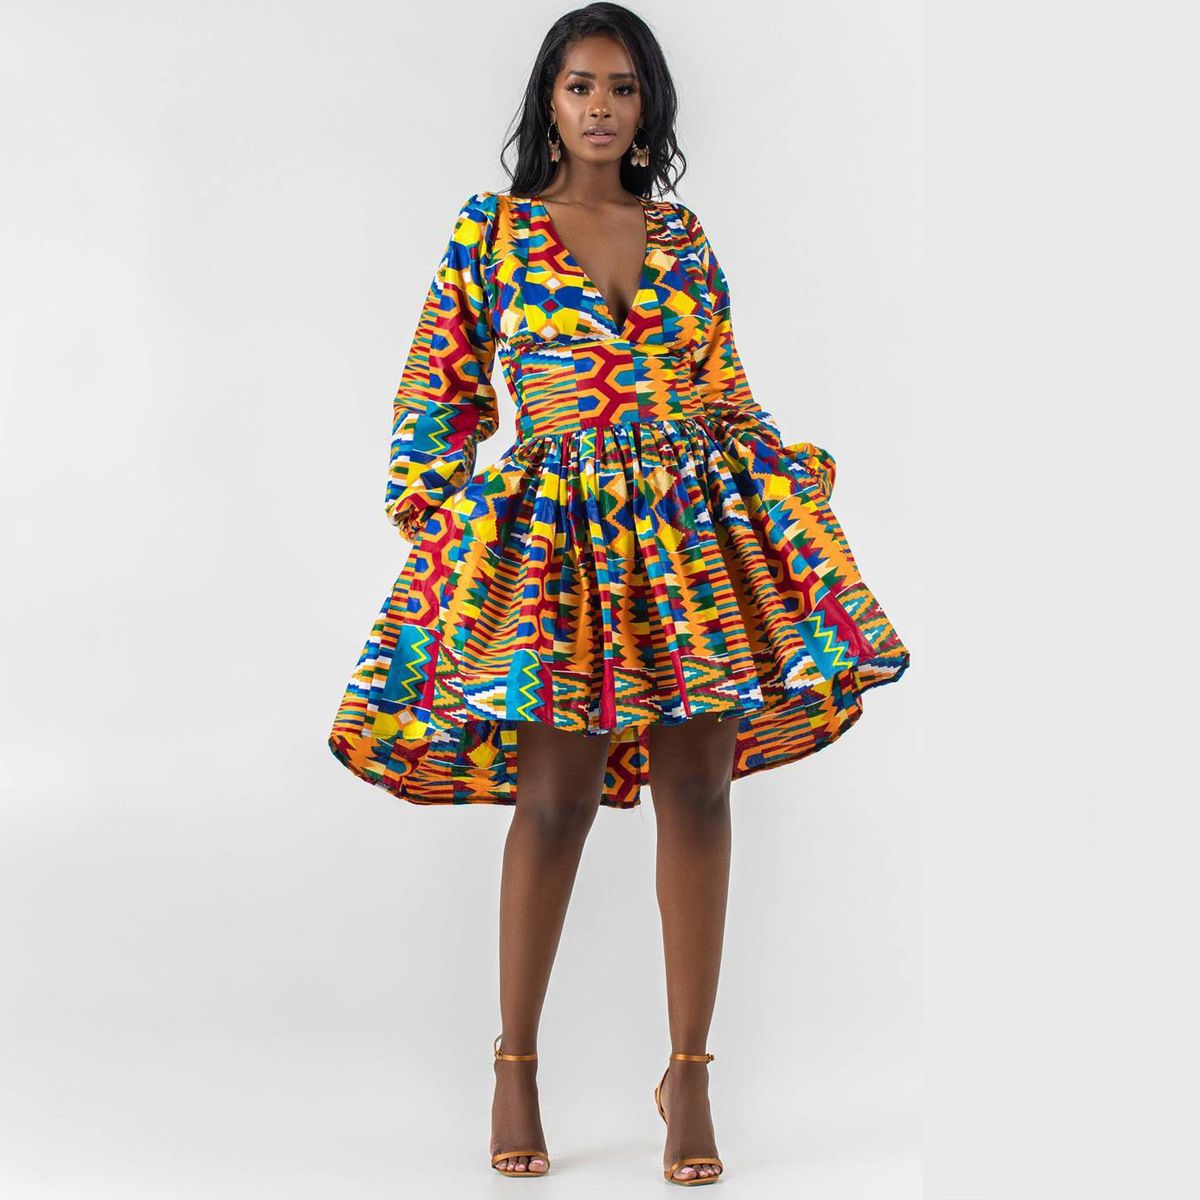 Womens African Ankara Print Short Dress Traditional Casual Outfits Attire  2021 Fashion Puff Sleeve V Neck Africa Mini Dresses From Shesheqiu, $24.82  | DHgate.Com